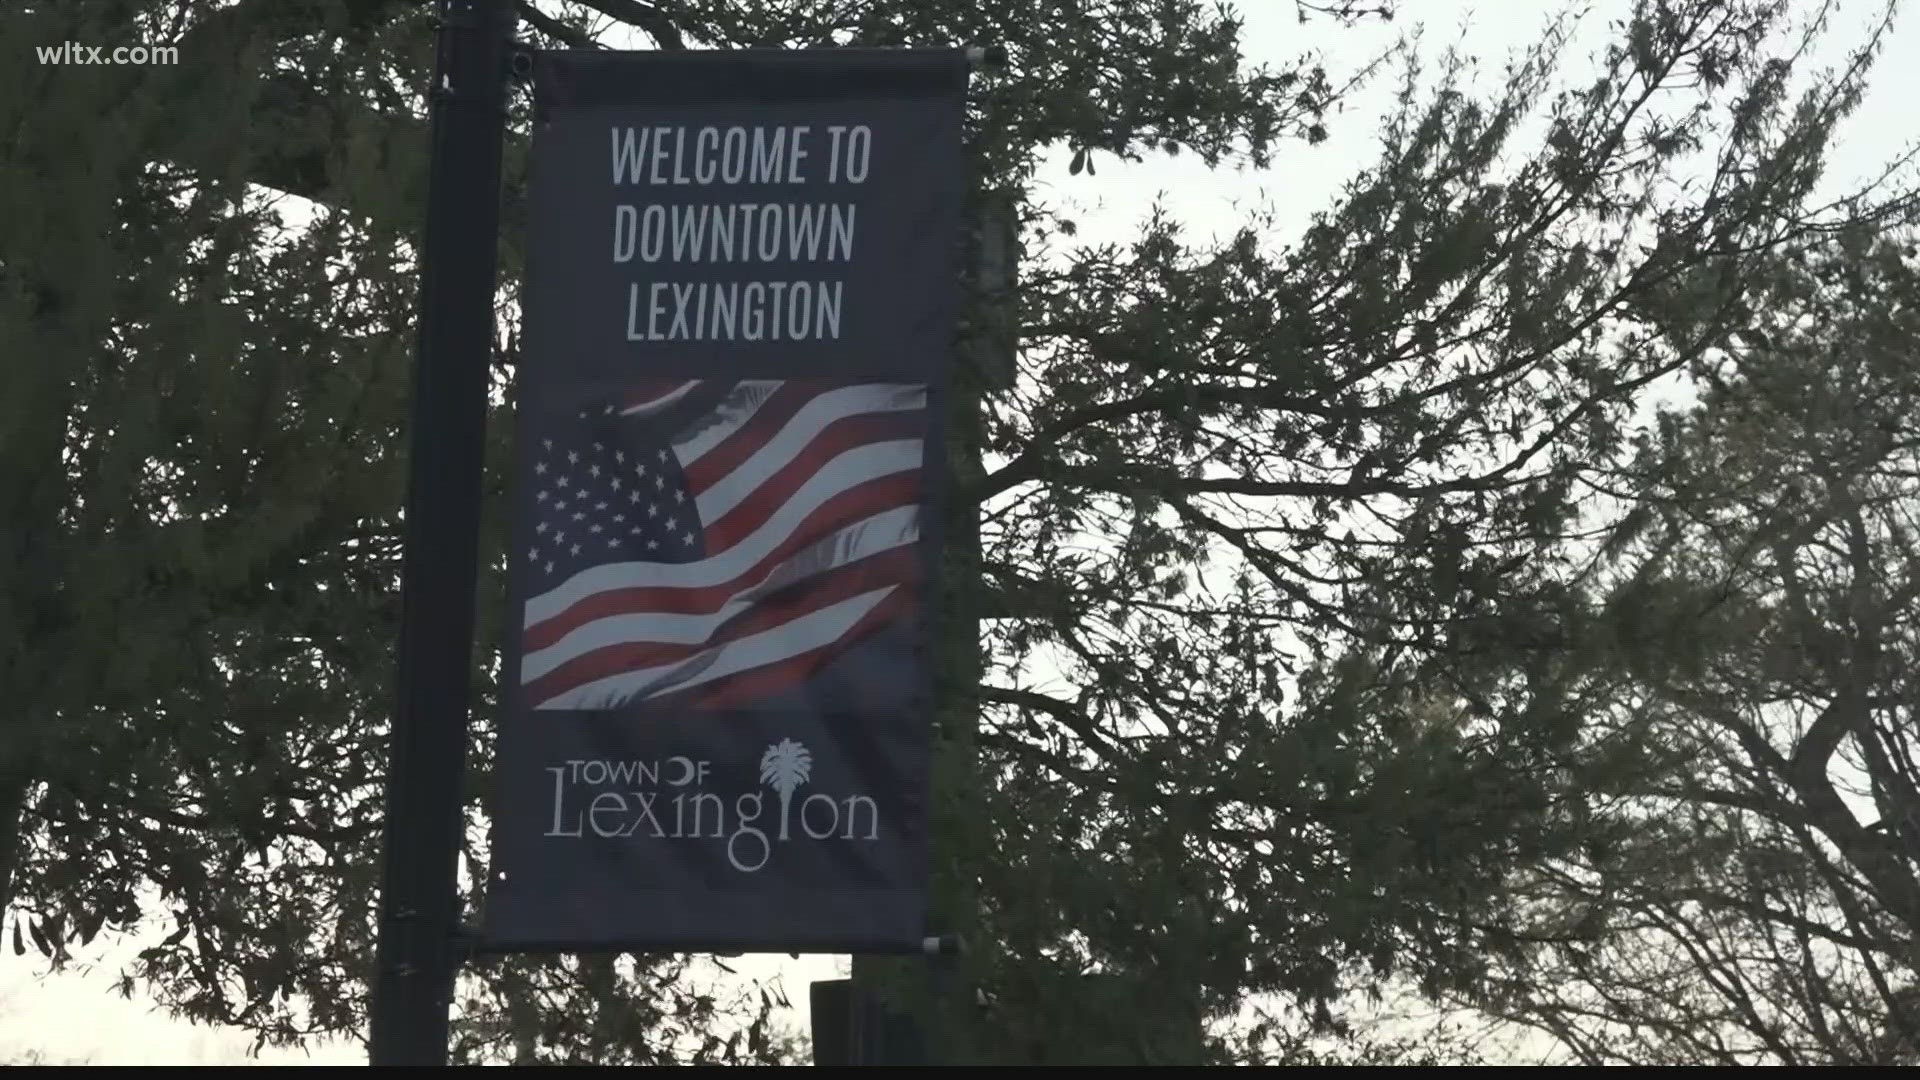 Several candidates are running for the open town council seat in the Town of Lexington.